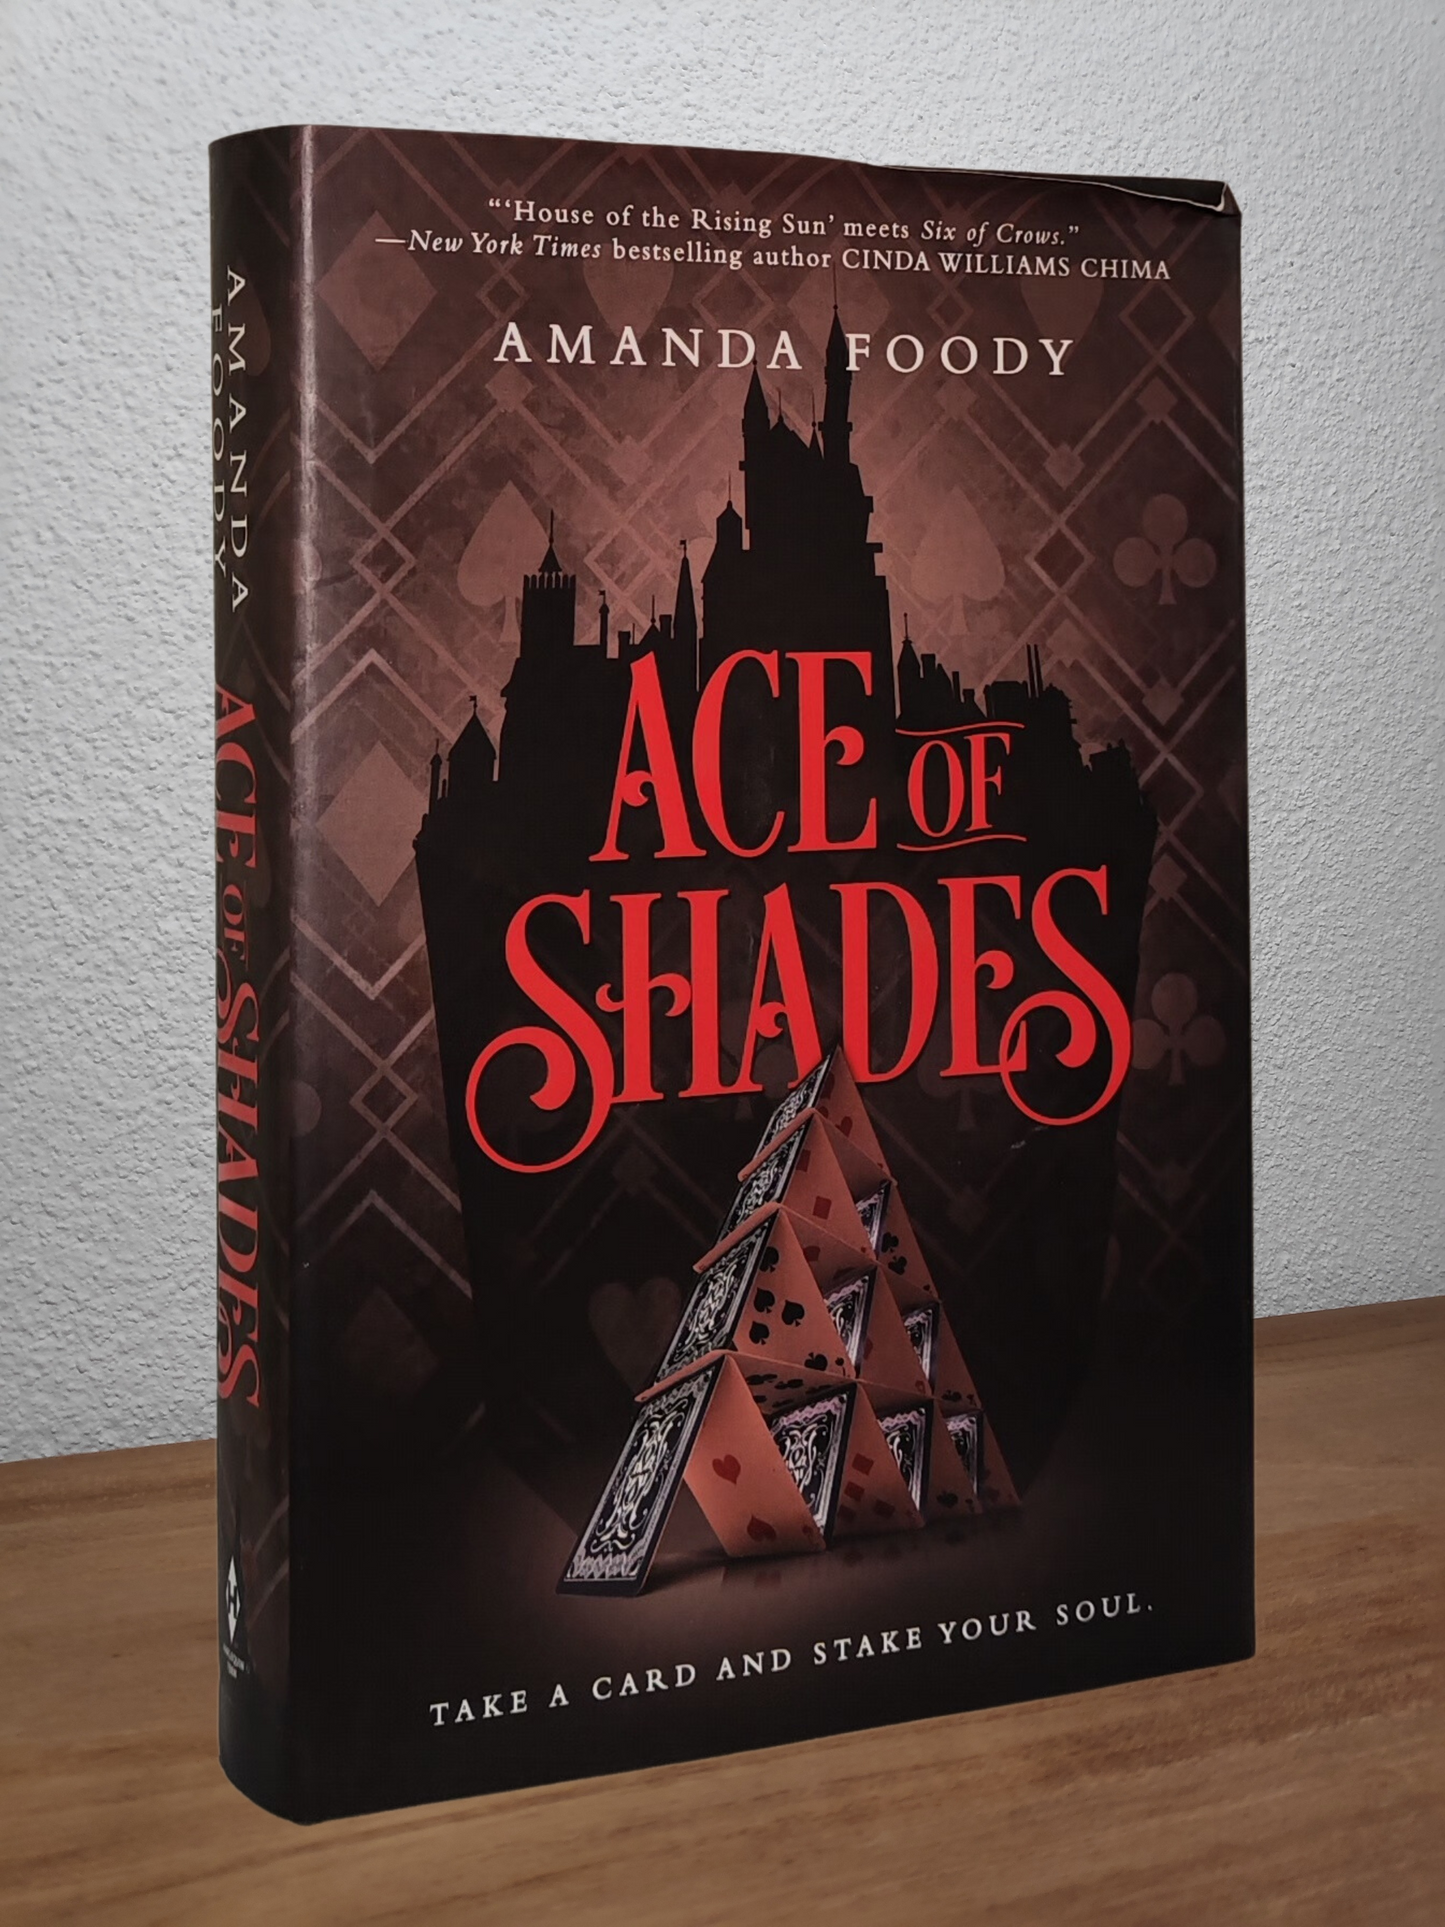 Amanda Foody - Ace of Shades - Second-hand english book to deliver in Zurich & Switzerland